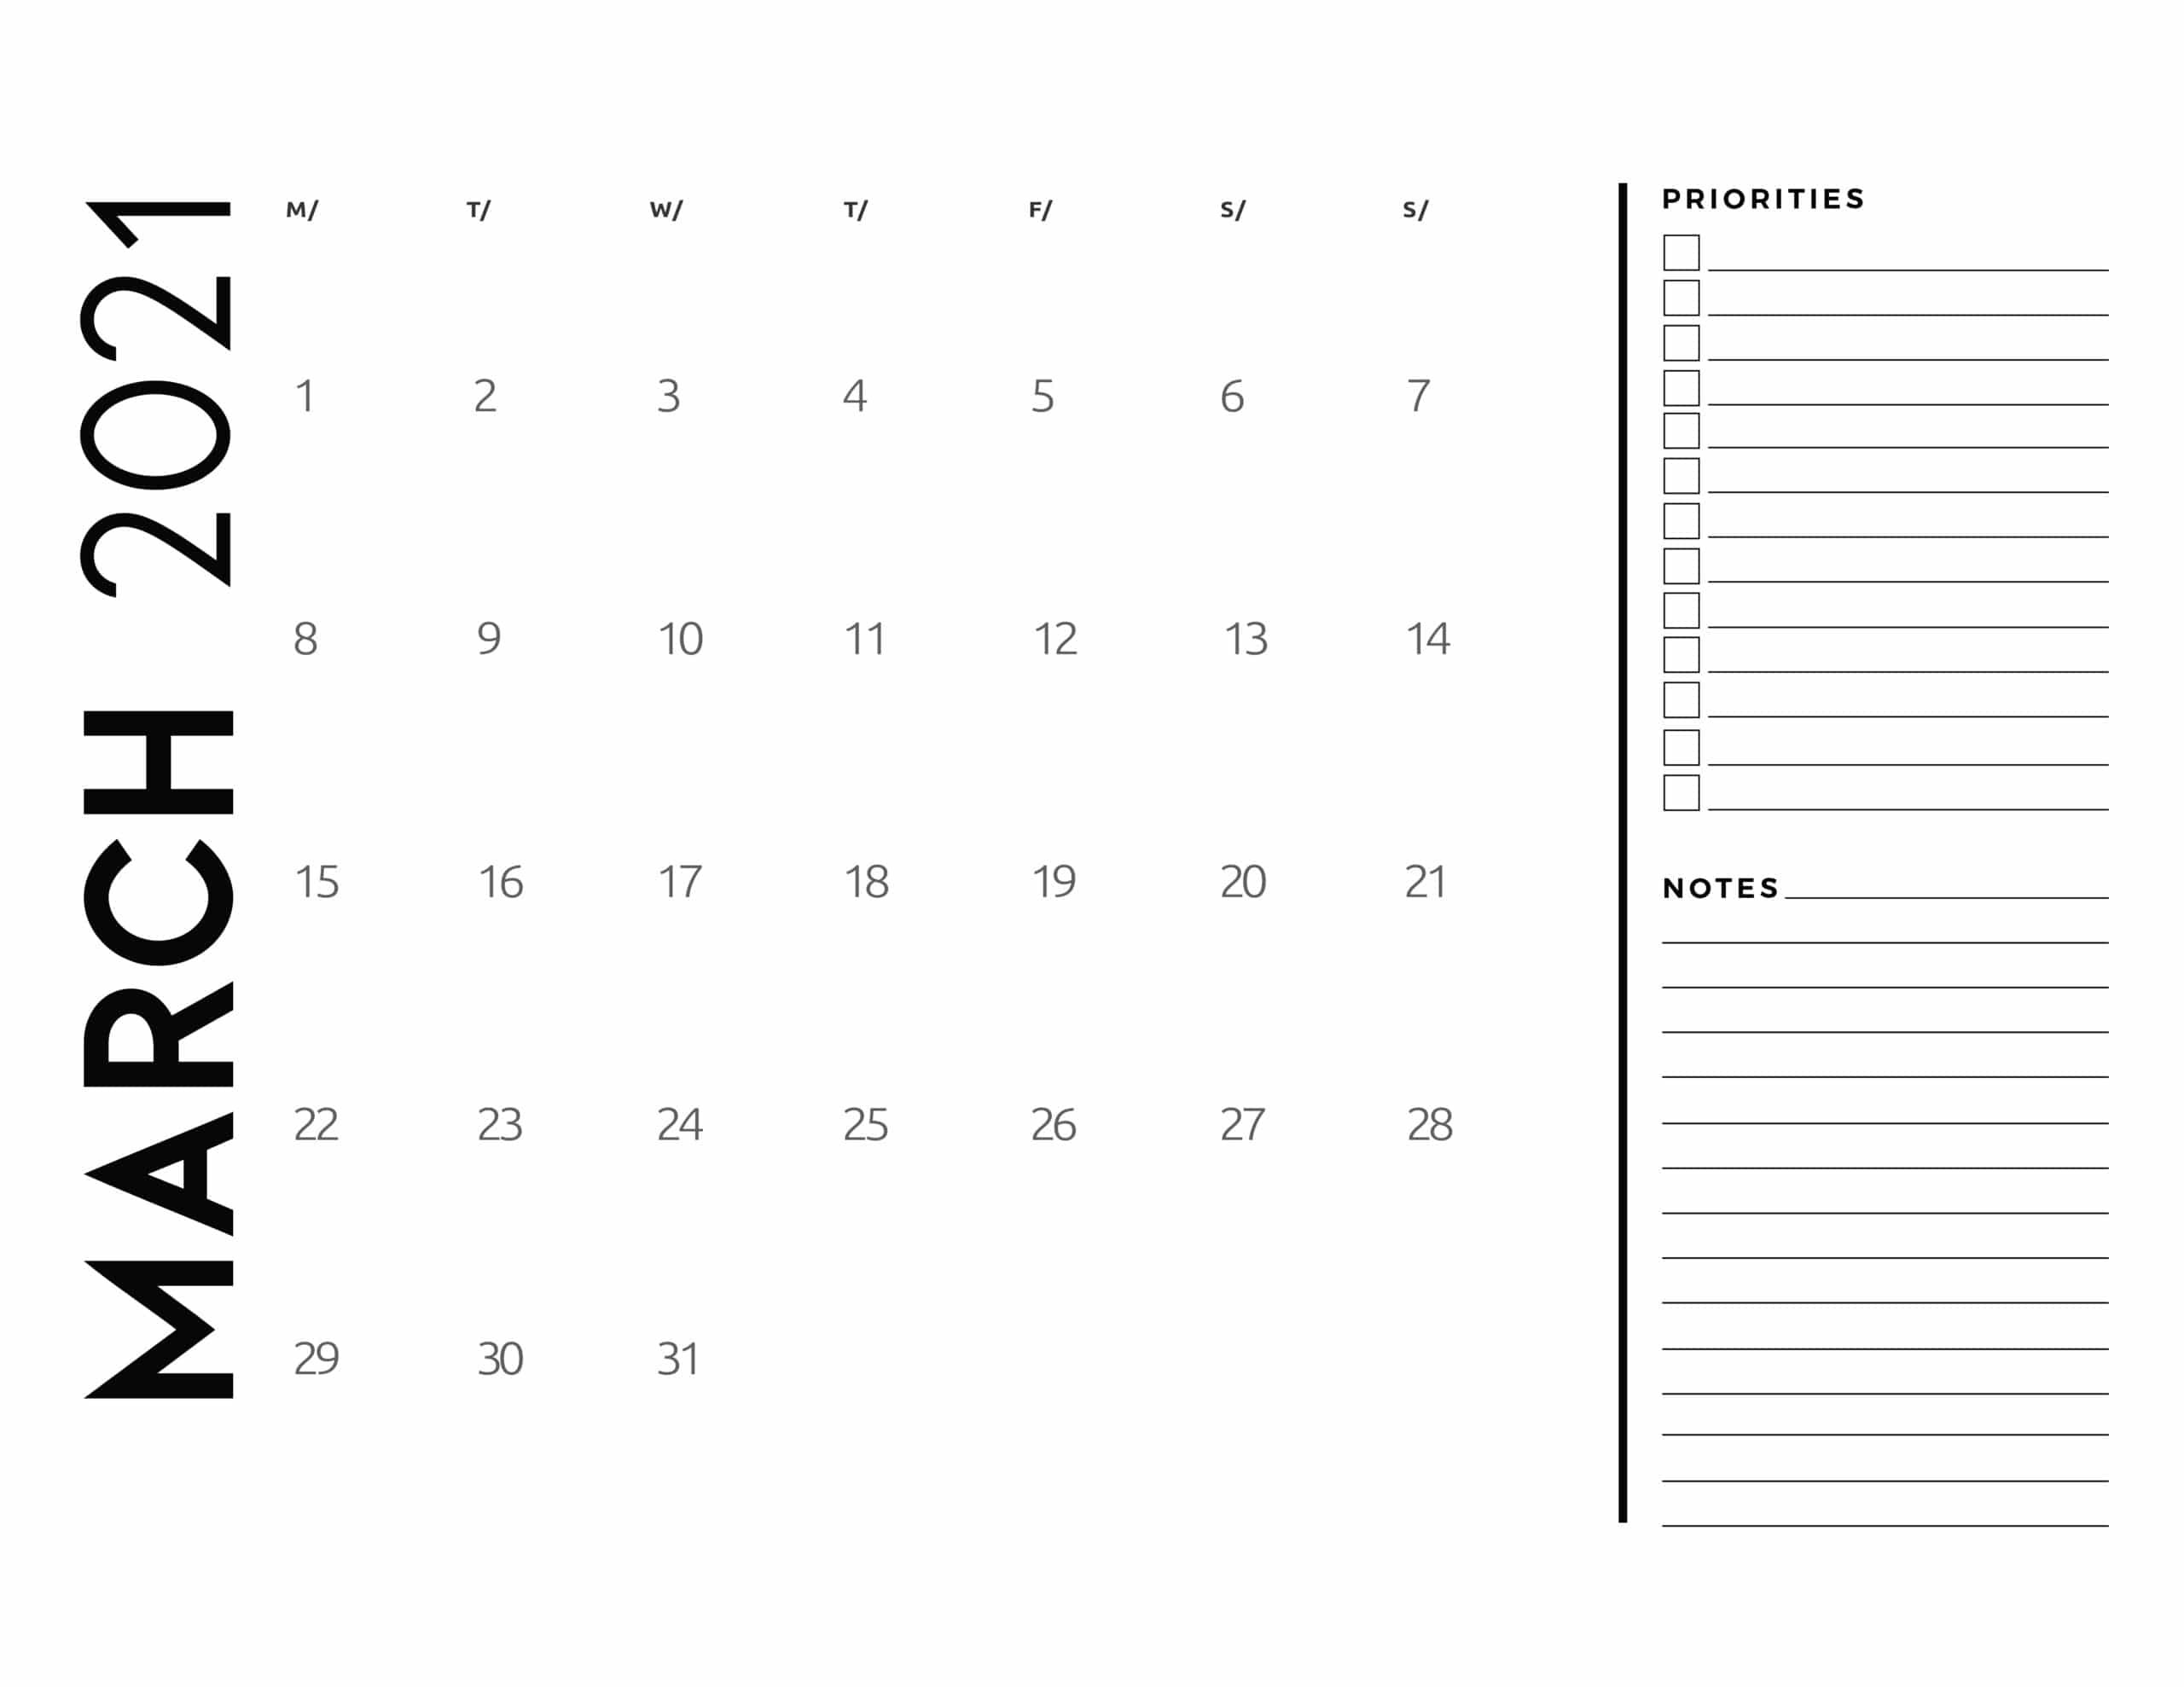 Free 2021 Calendar Priorities And Notes - World Of Printables-Full Size Feb 2021 Calendar To Print Free